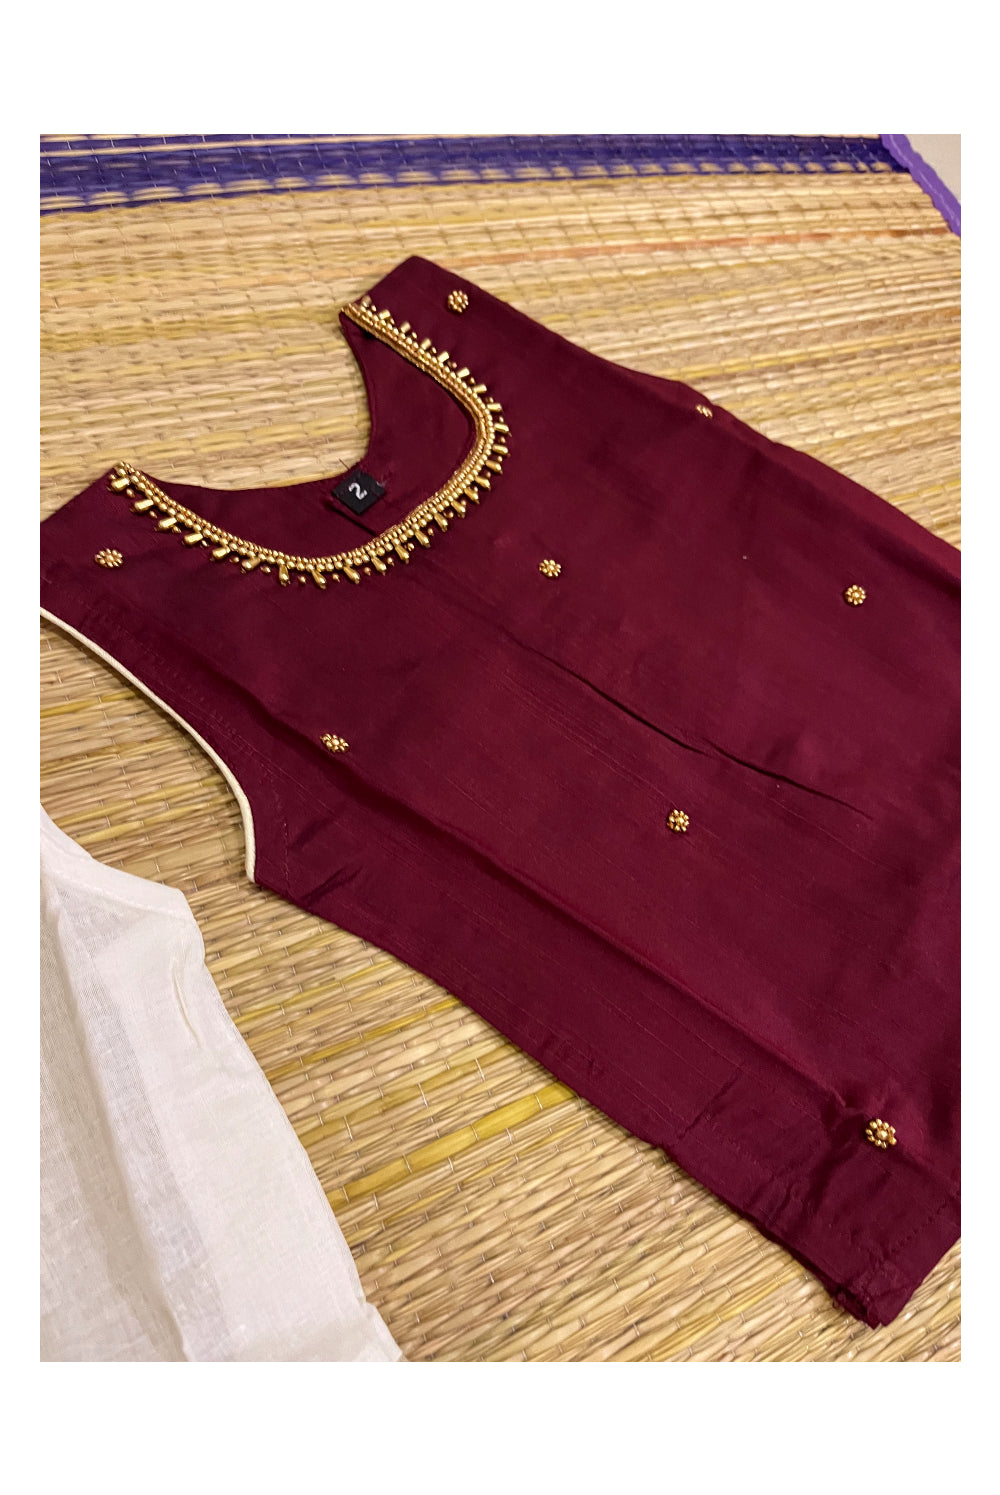 Southloom Kerala Pavada Blouse with Maroon Bead Work Design (Age - 2 Year)